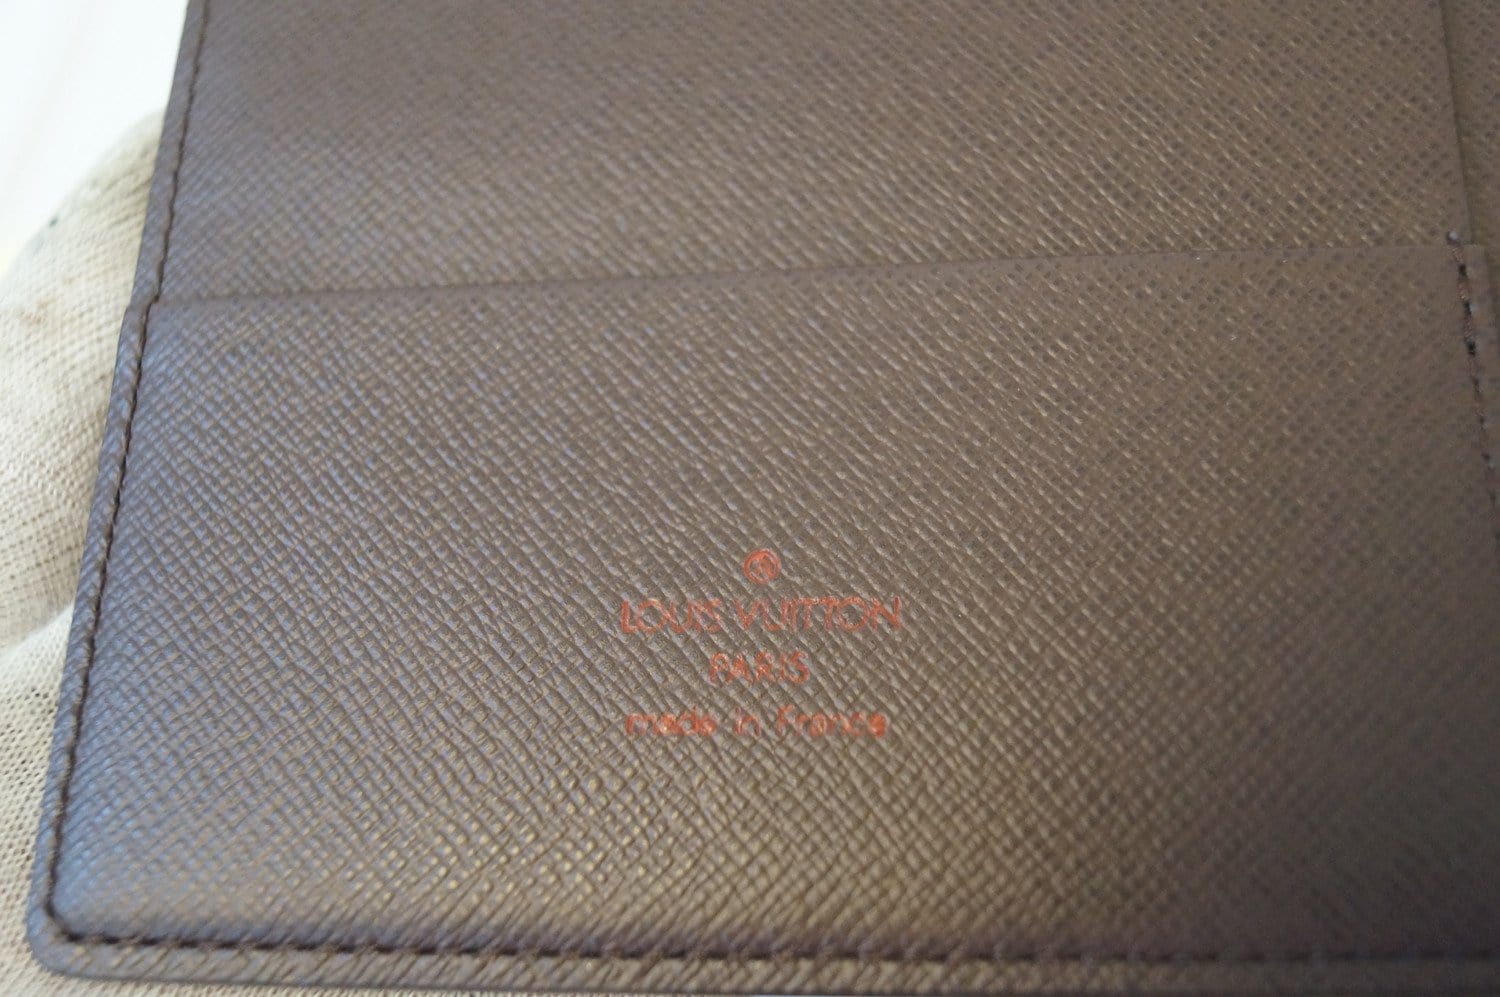 Louis Vuitton Large Ring Agenda Cover GM in Damier Ebene - SOLD